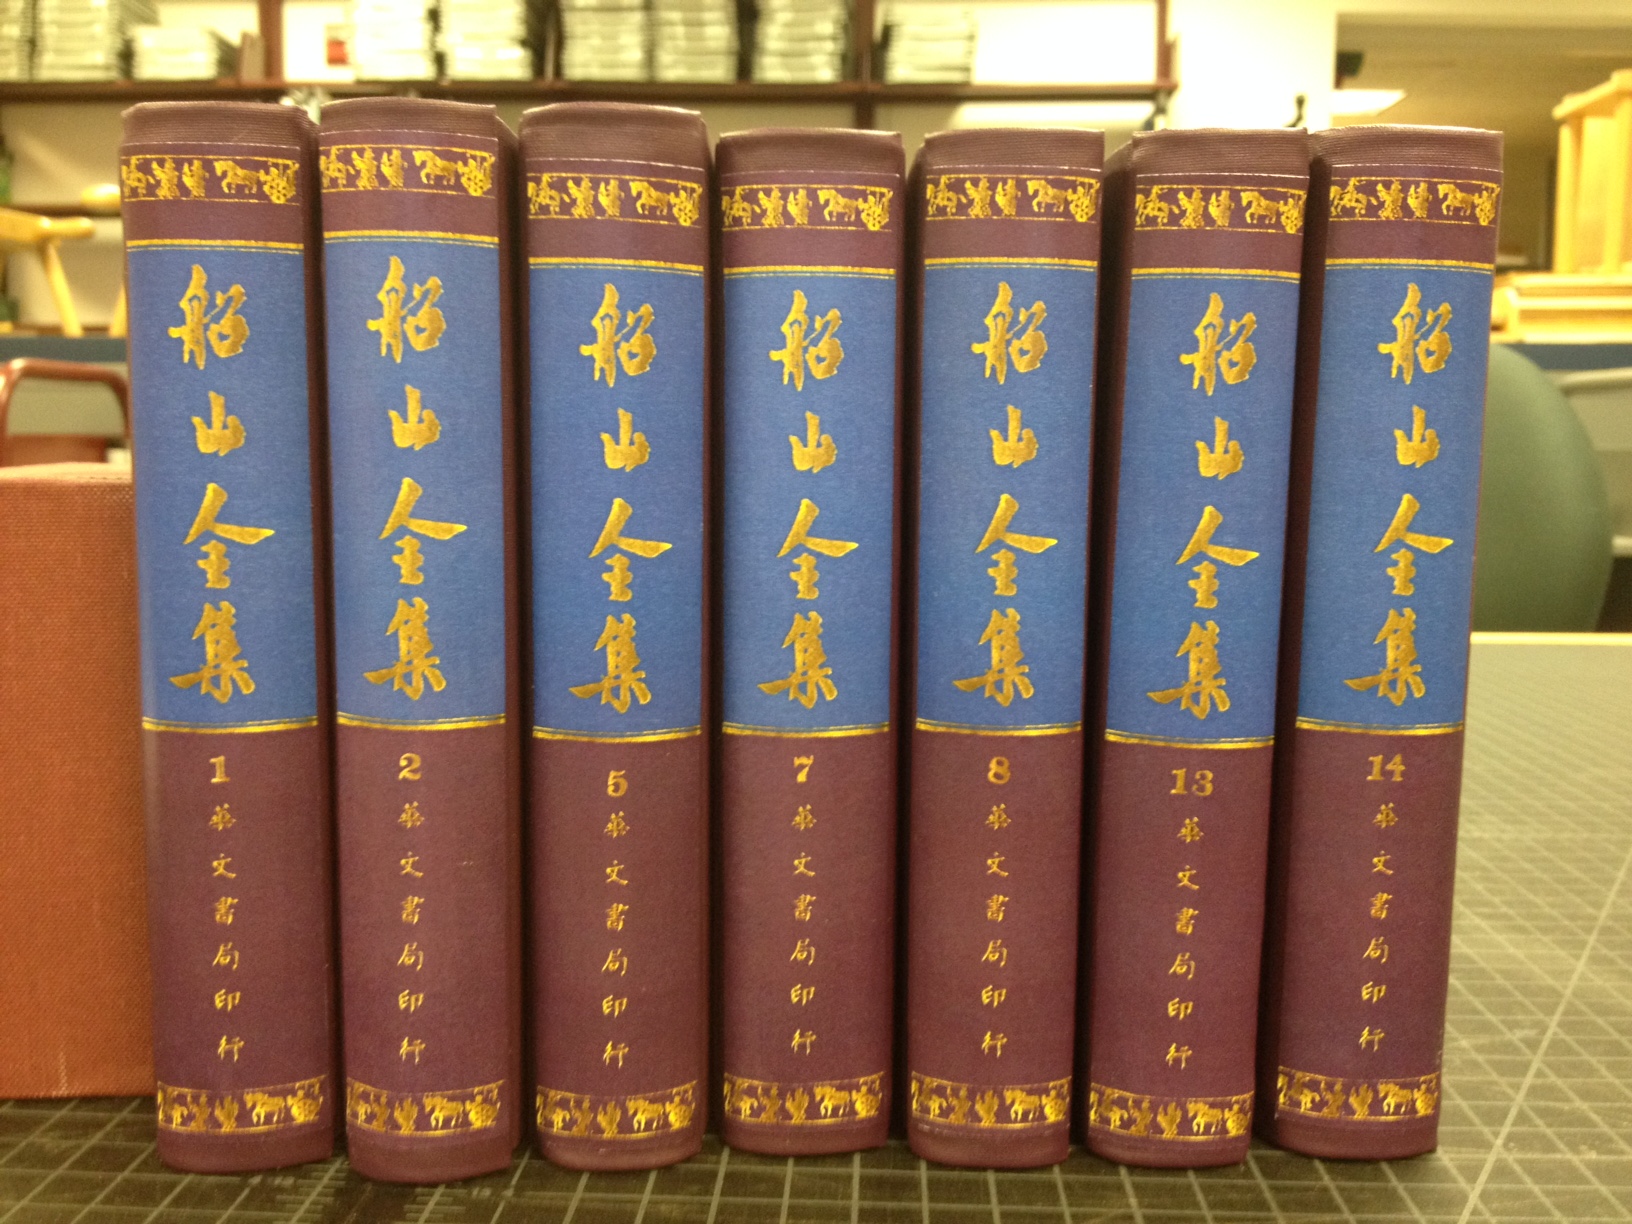 A picture of the spines of a set of Chinese books